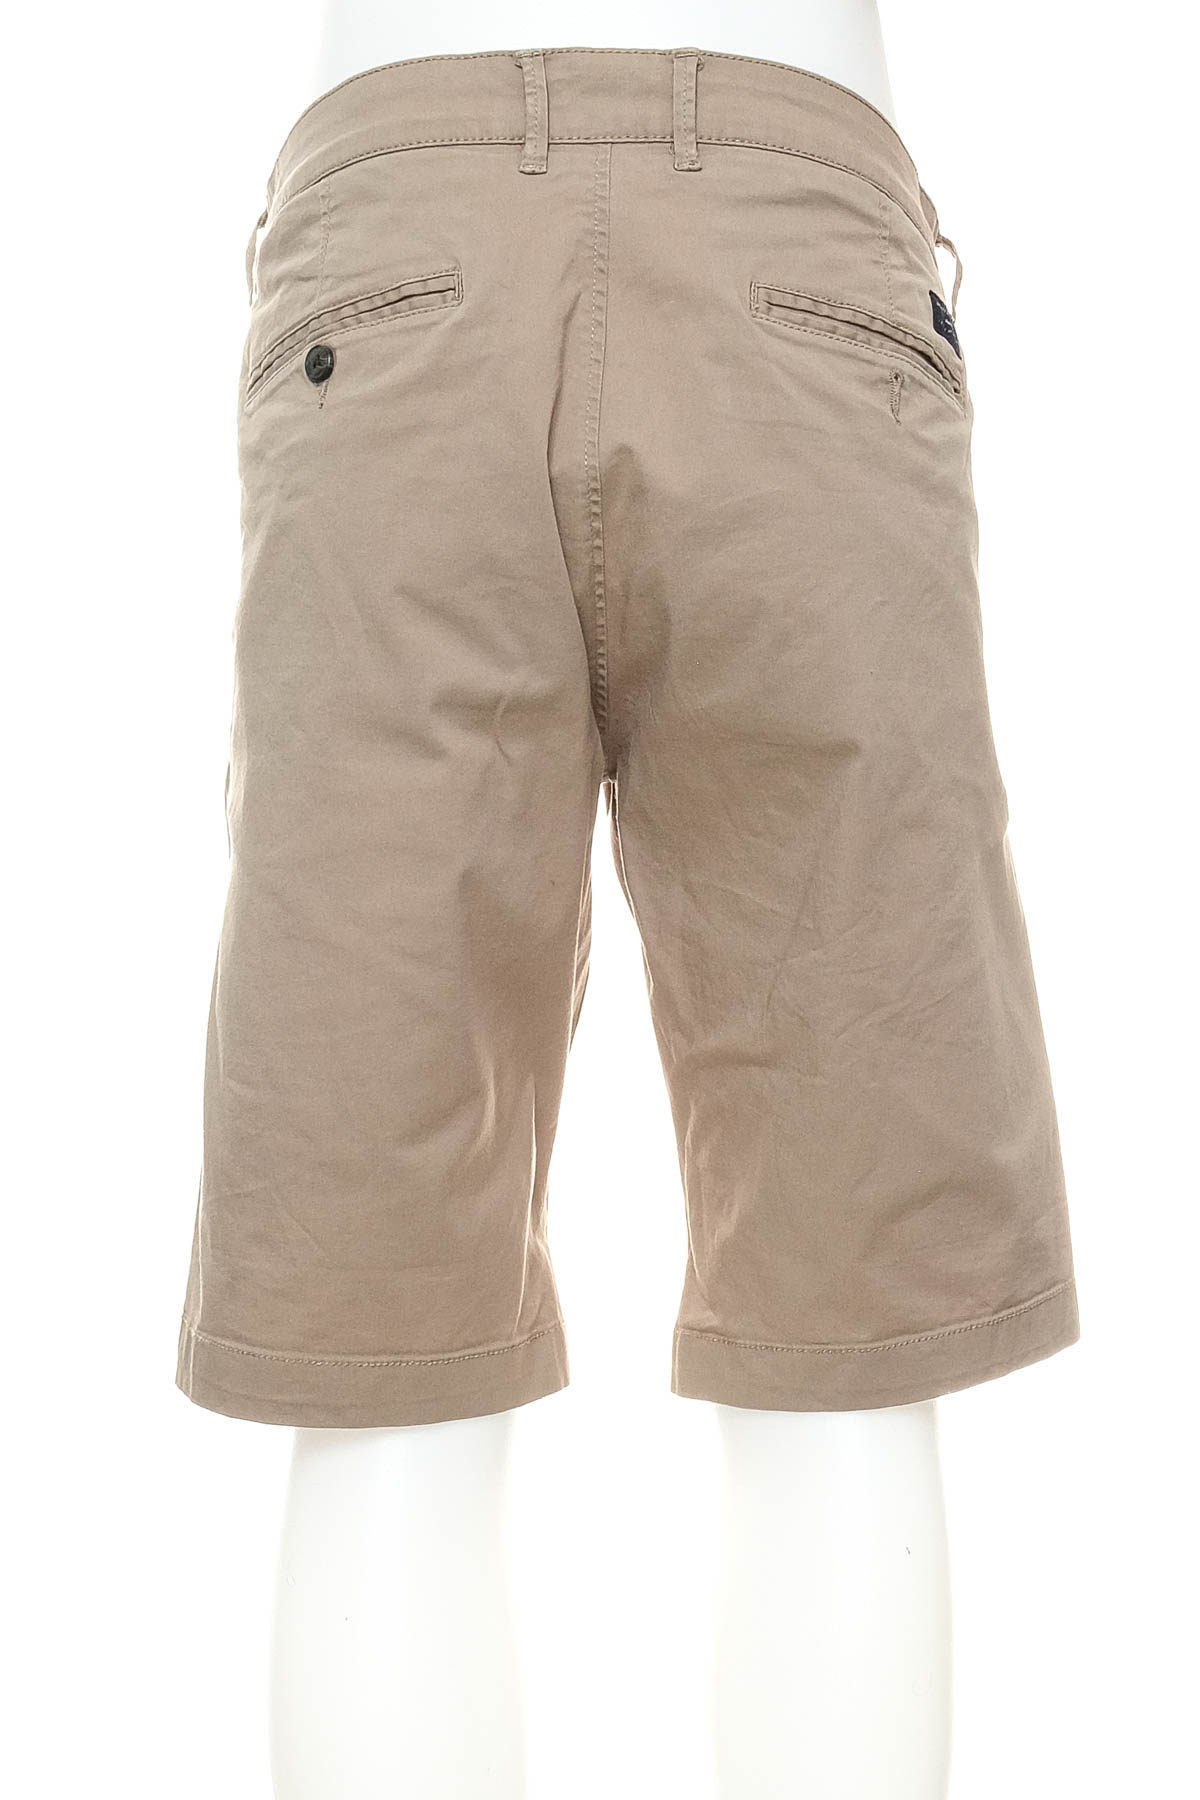 Men's shorts - SELECTED / HOMME - 1